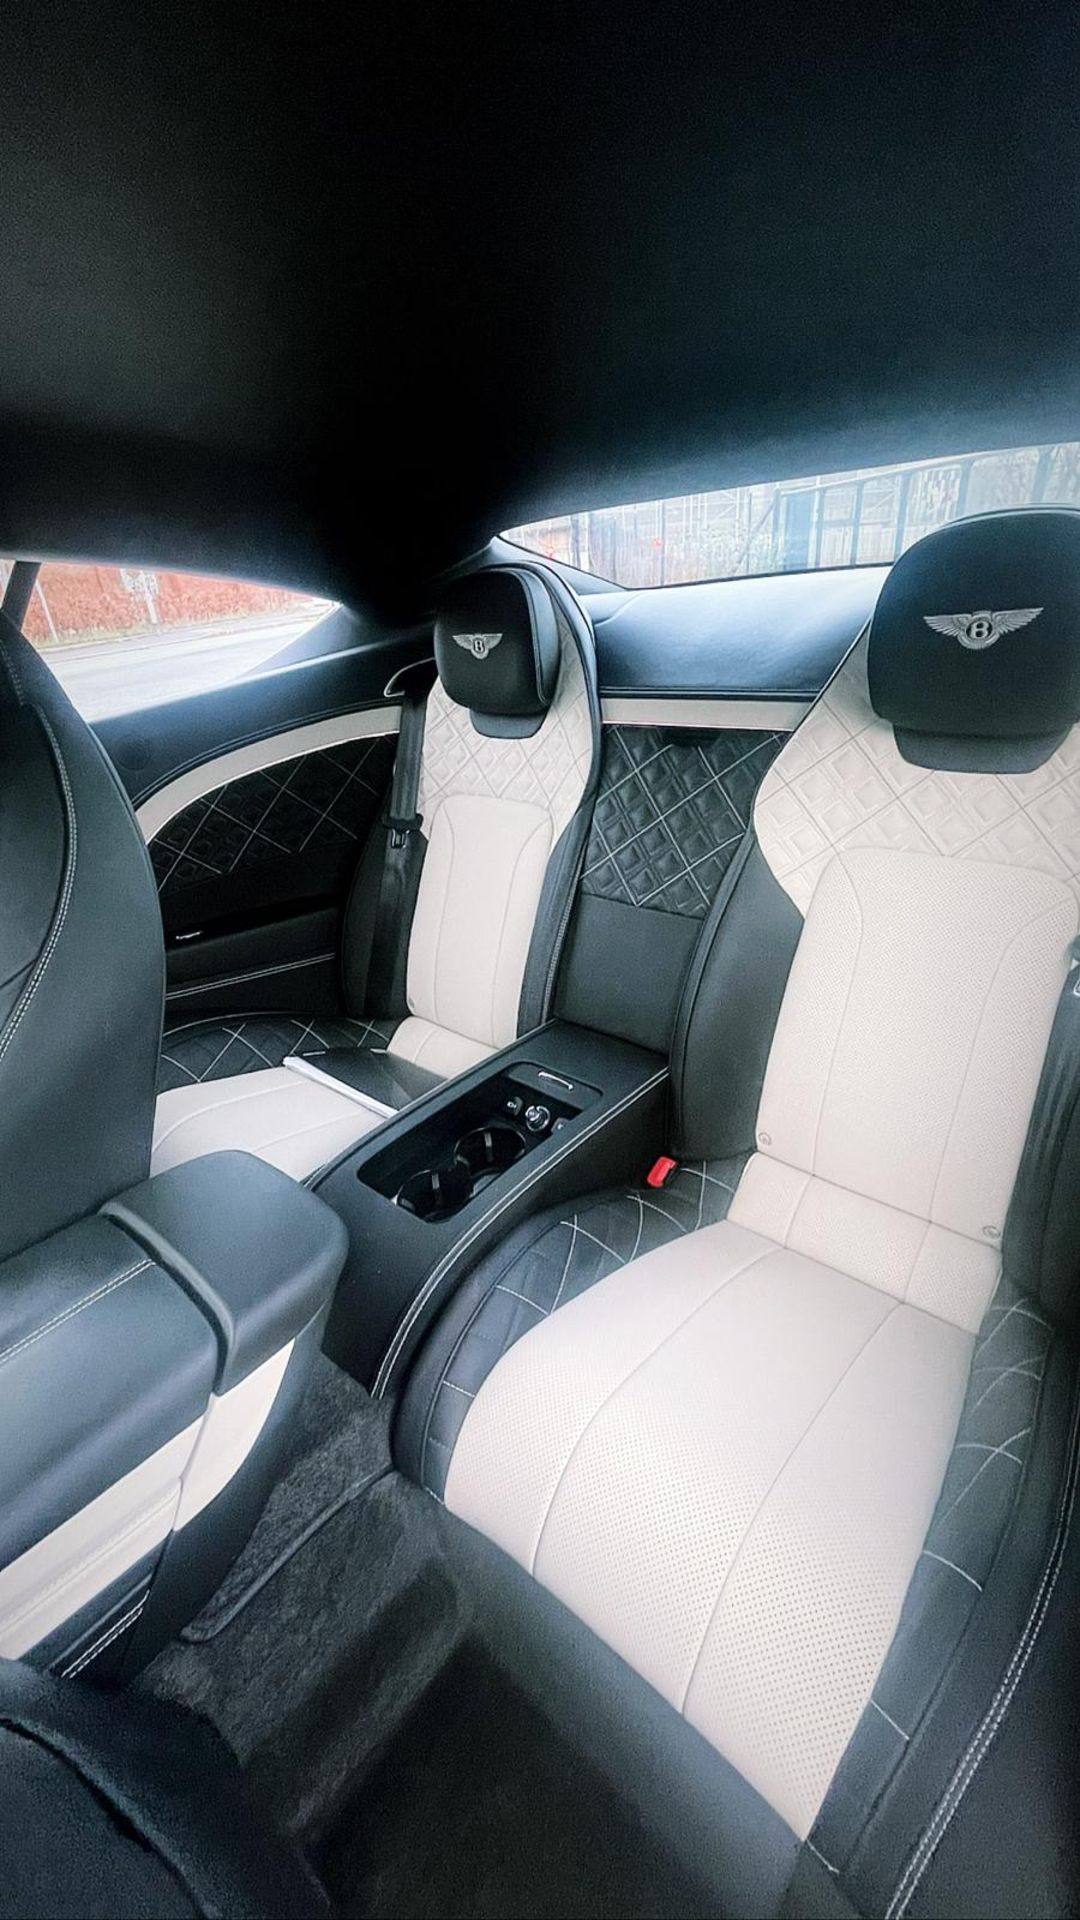 2018 BENTLEY CONTINENTAL GT 6.0 W12 1st EDITION AUTO, COMFORT SEATING, ONLY 10,200 MILES *PLUS VAT* - Image 9 of 15